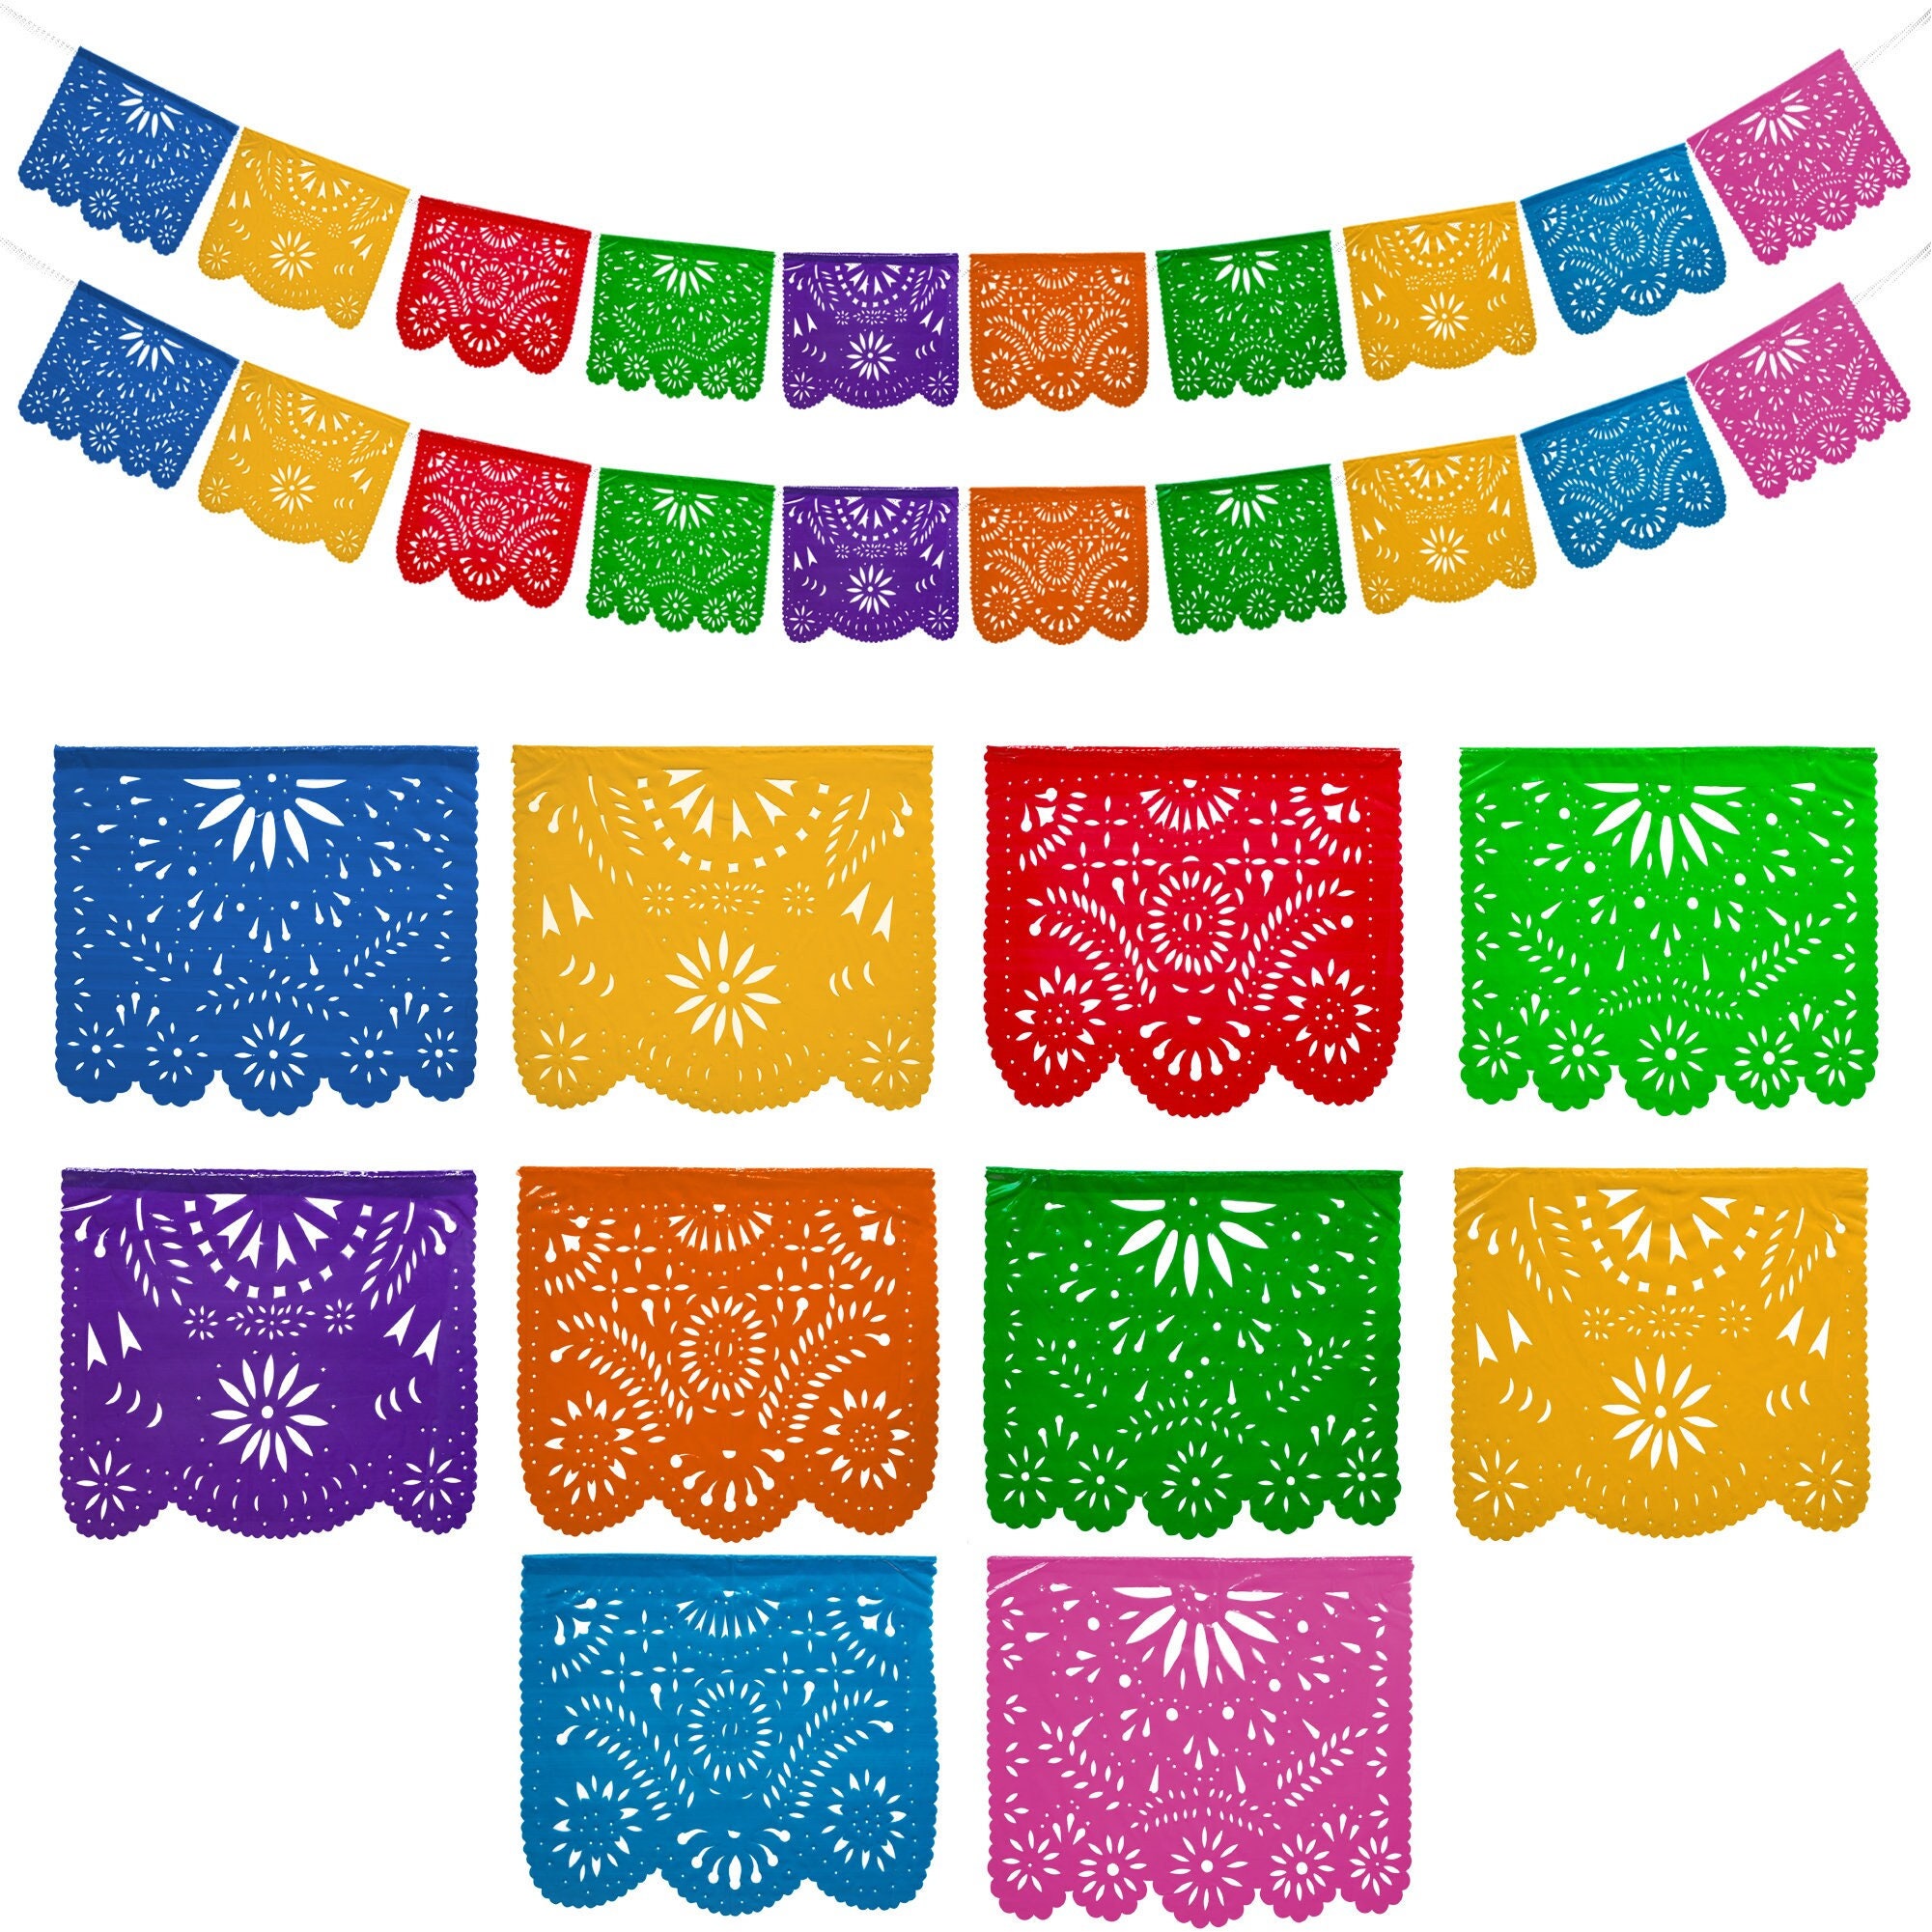 Mexican Party Banners 2 Pack With 10 Multicolor Plastic Flags per Banner  Mexican Themed Party Decorations Papel Picado Mexicano -  Israel